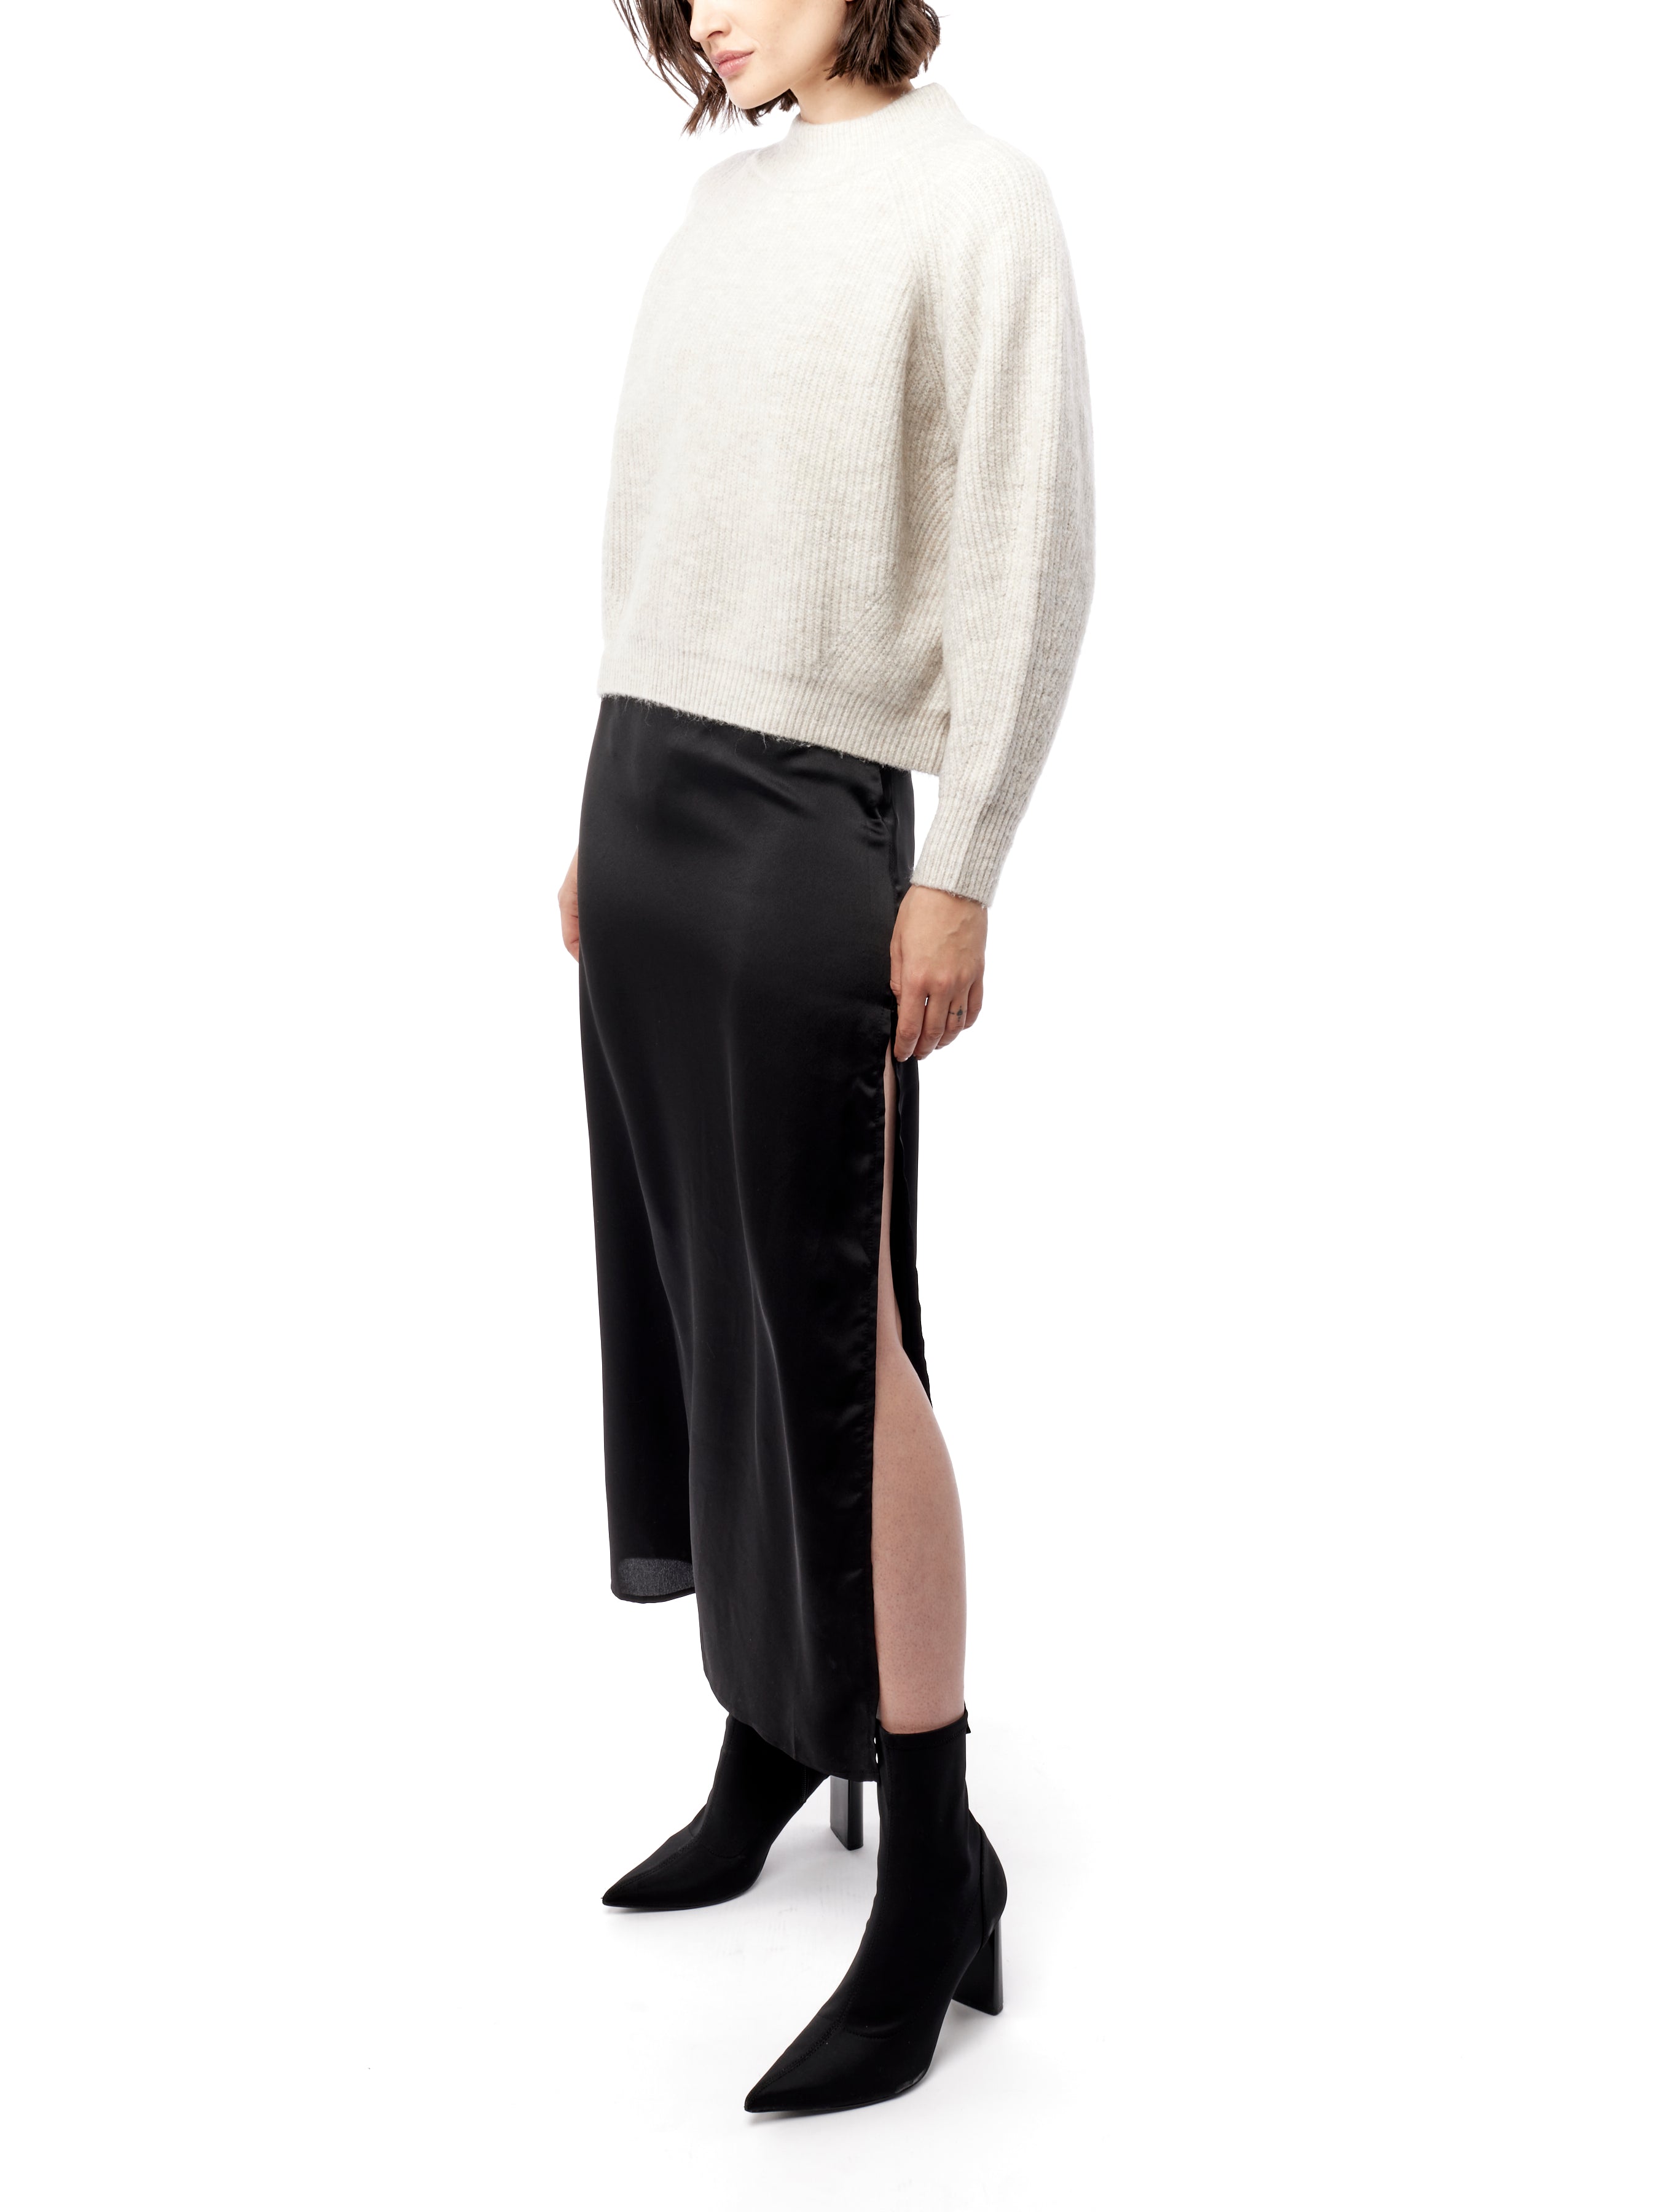 mock turtleneck sweater with stitch detailing, long sleeves and an easy, relaxed fit in oatmeal